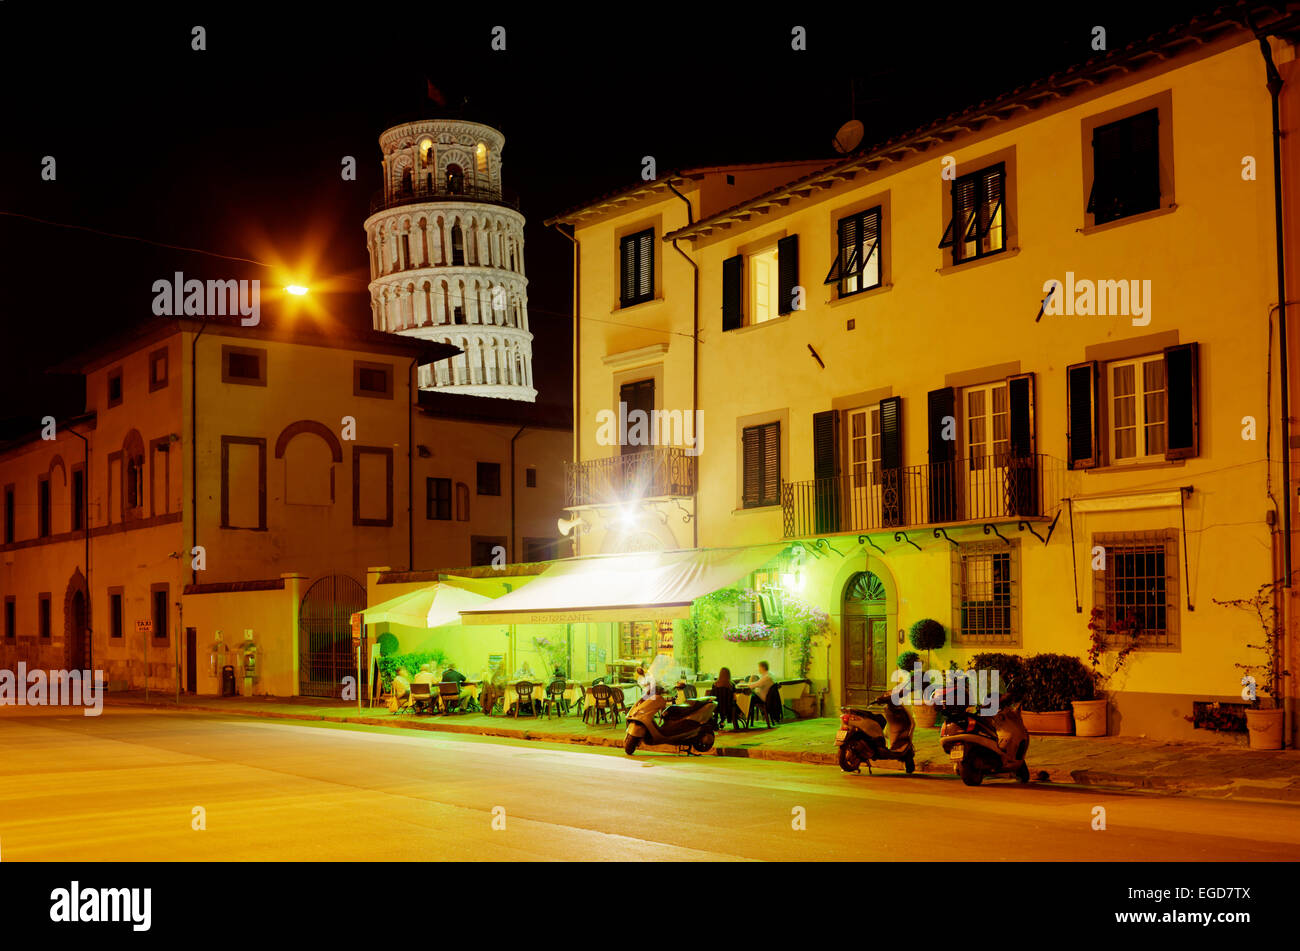 Restaurant at night with campanile in the background, bell tower, Torre pendente, leaning tower, Pisa, Tuscany, Italy, Europe Stock Photo